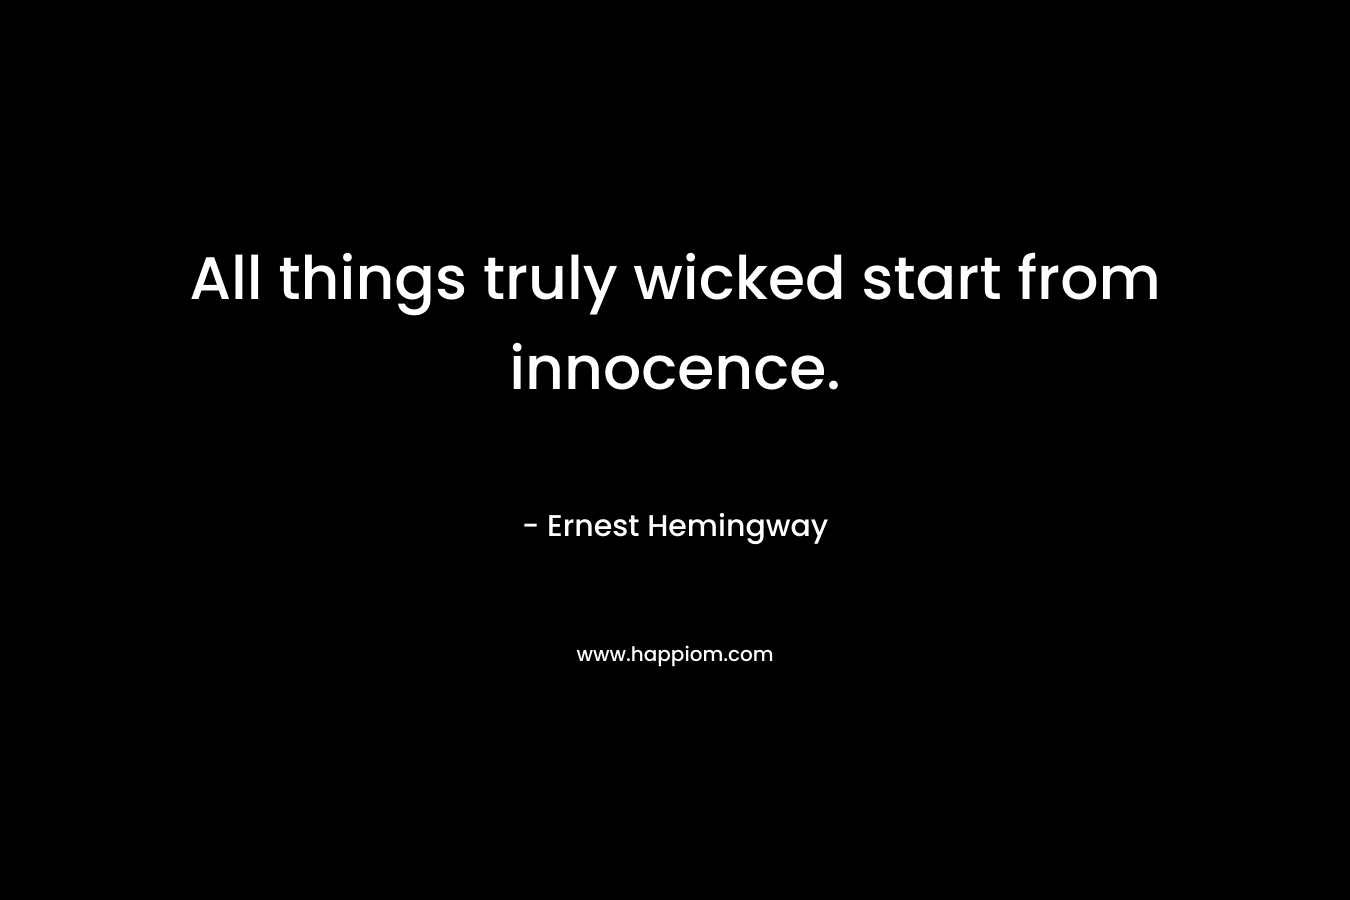 All things truly wicked start from innocence. – Ernest Hemingway